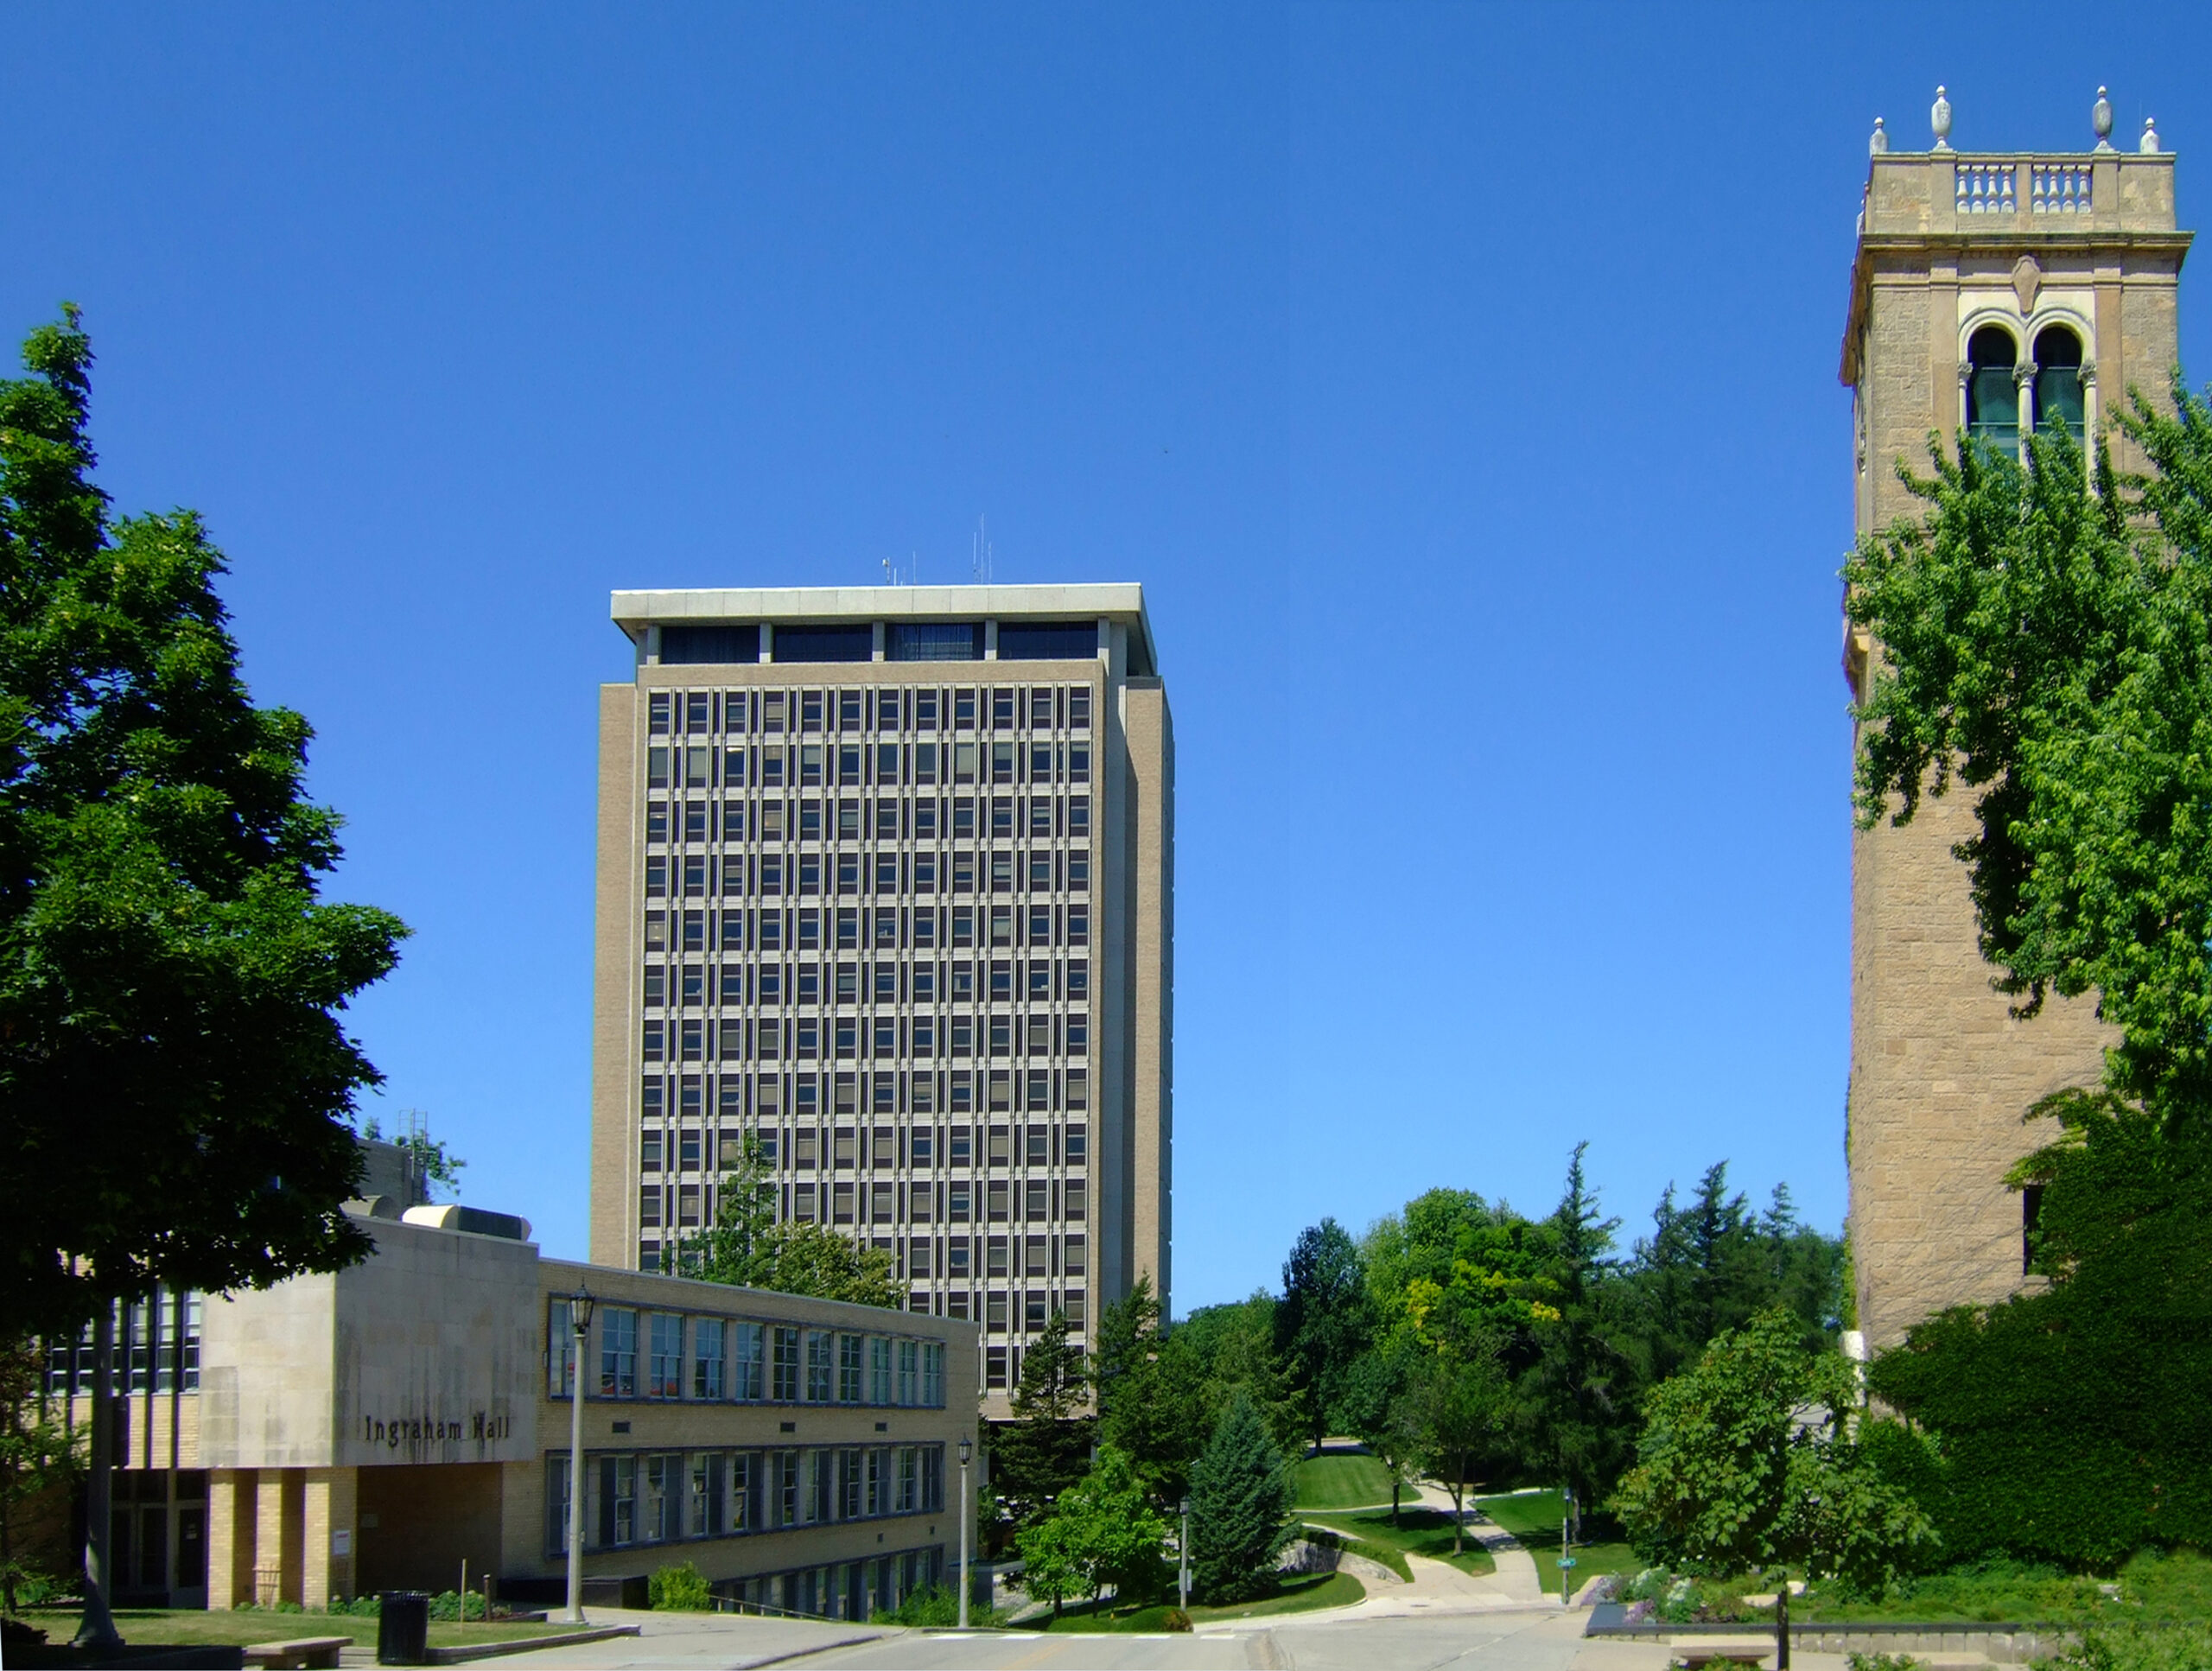 Van Hise Hall, home of University of Wisconsin System offices.